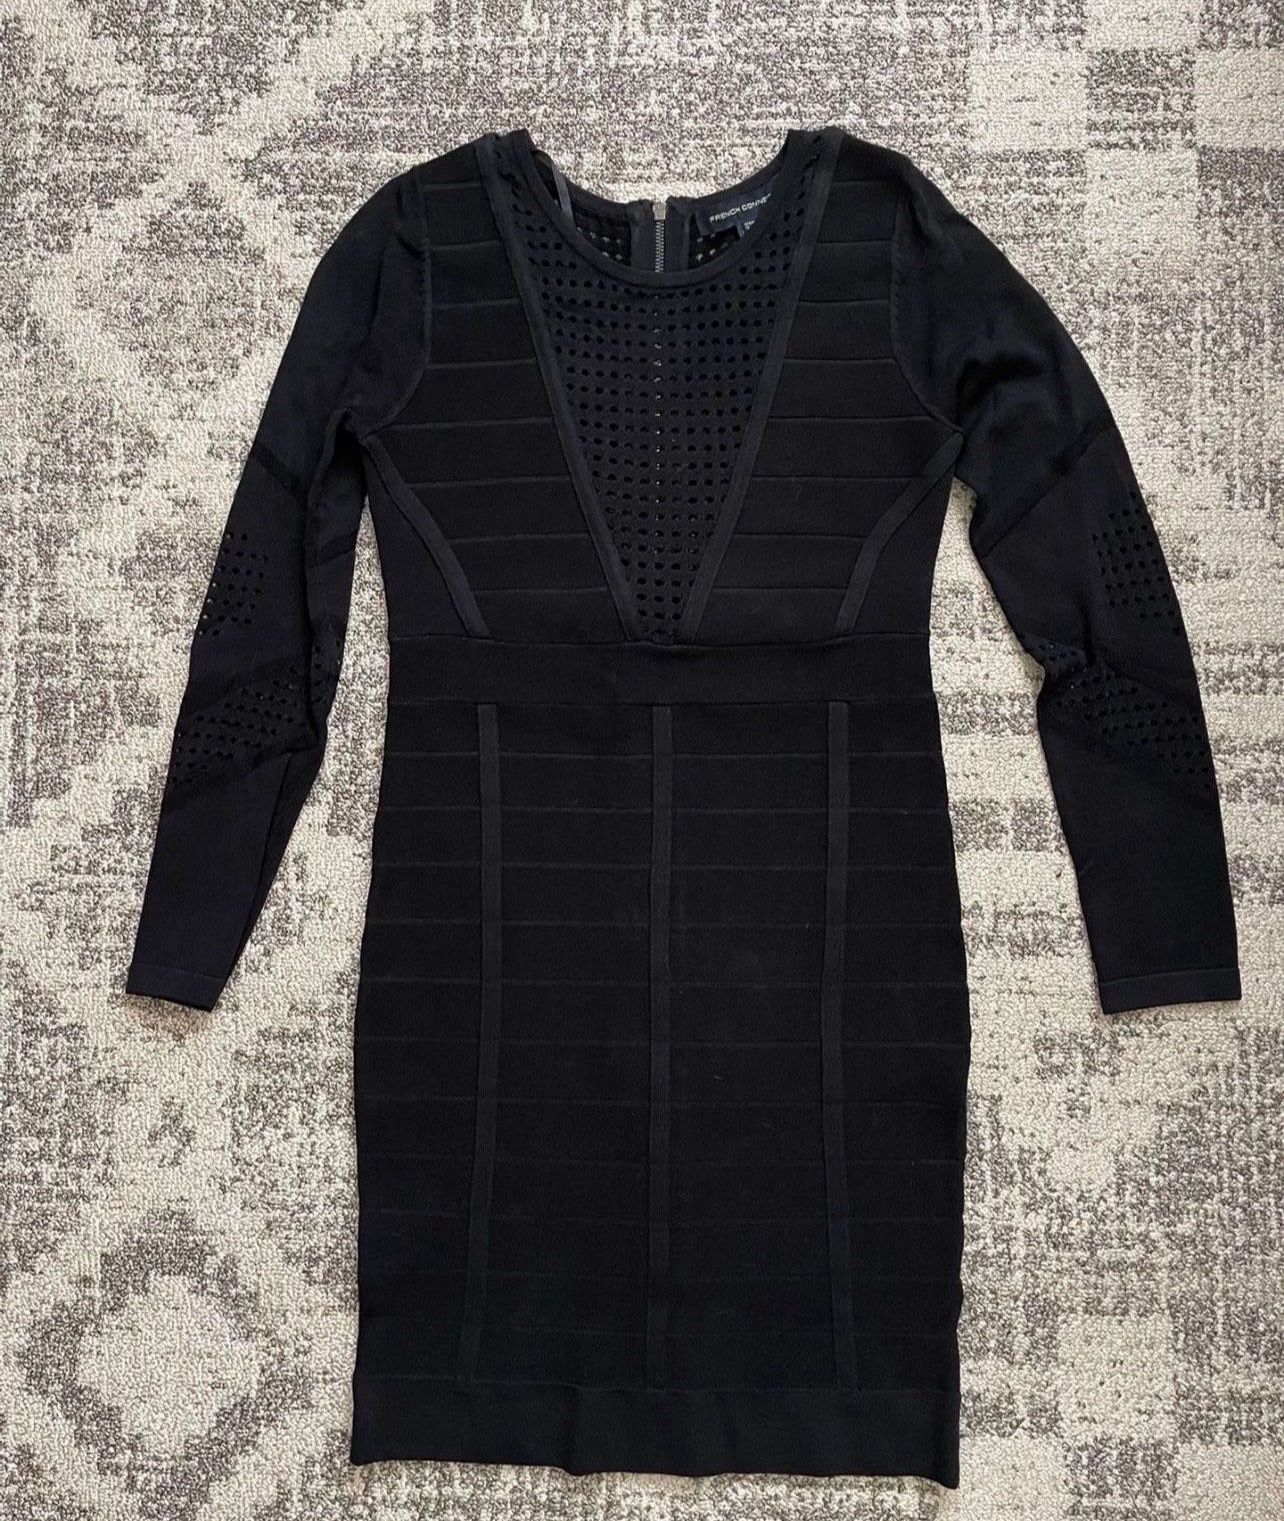 French Connection Sexy Dress In Excellent Condition Size 8  